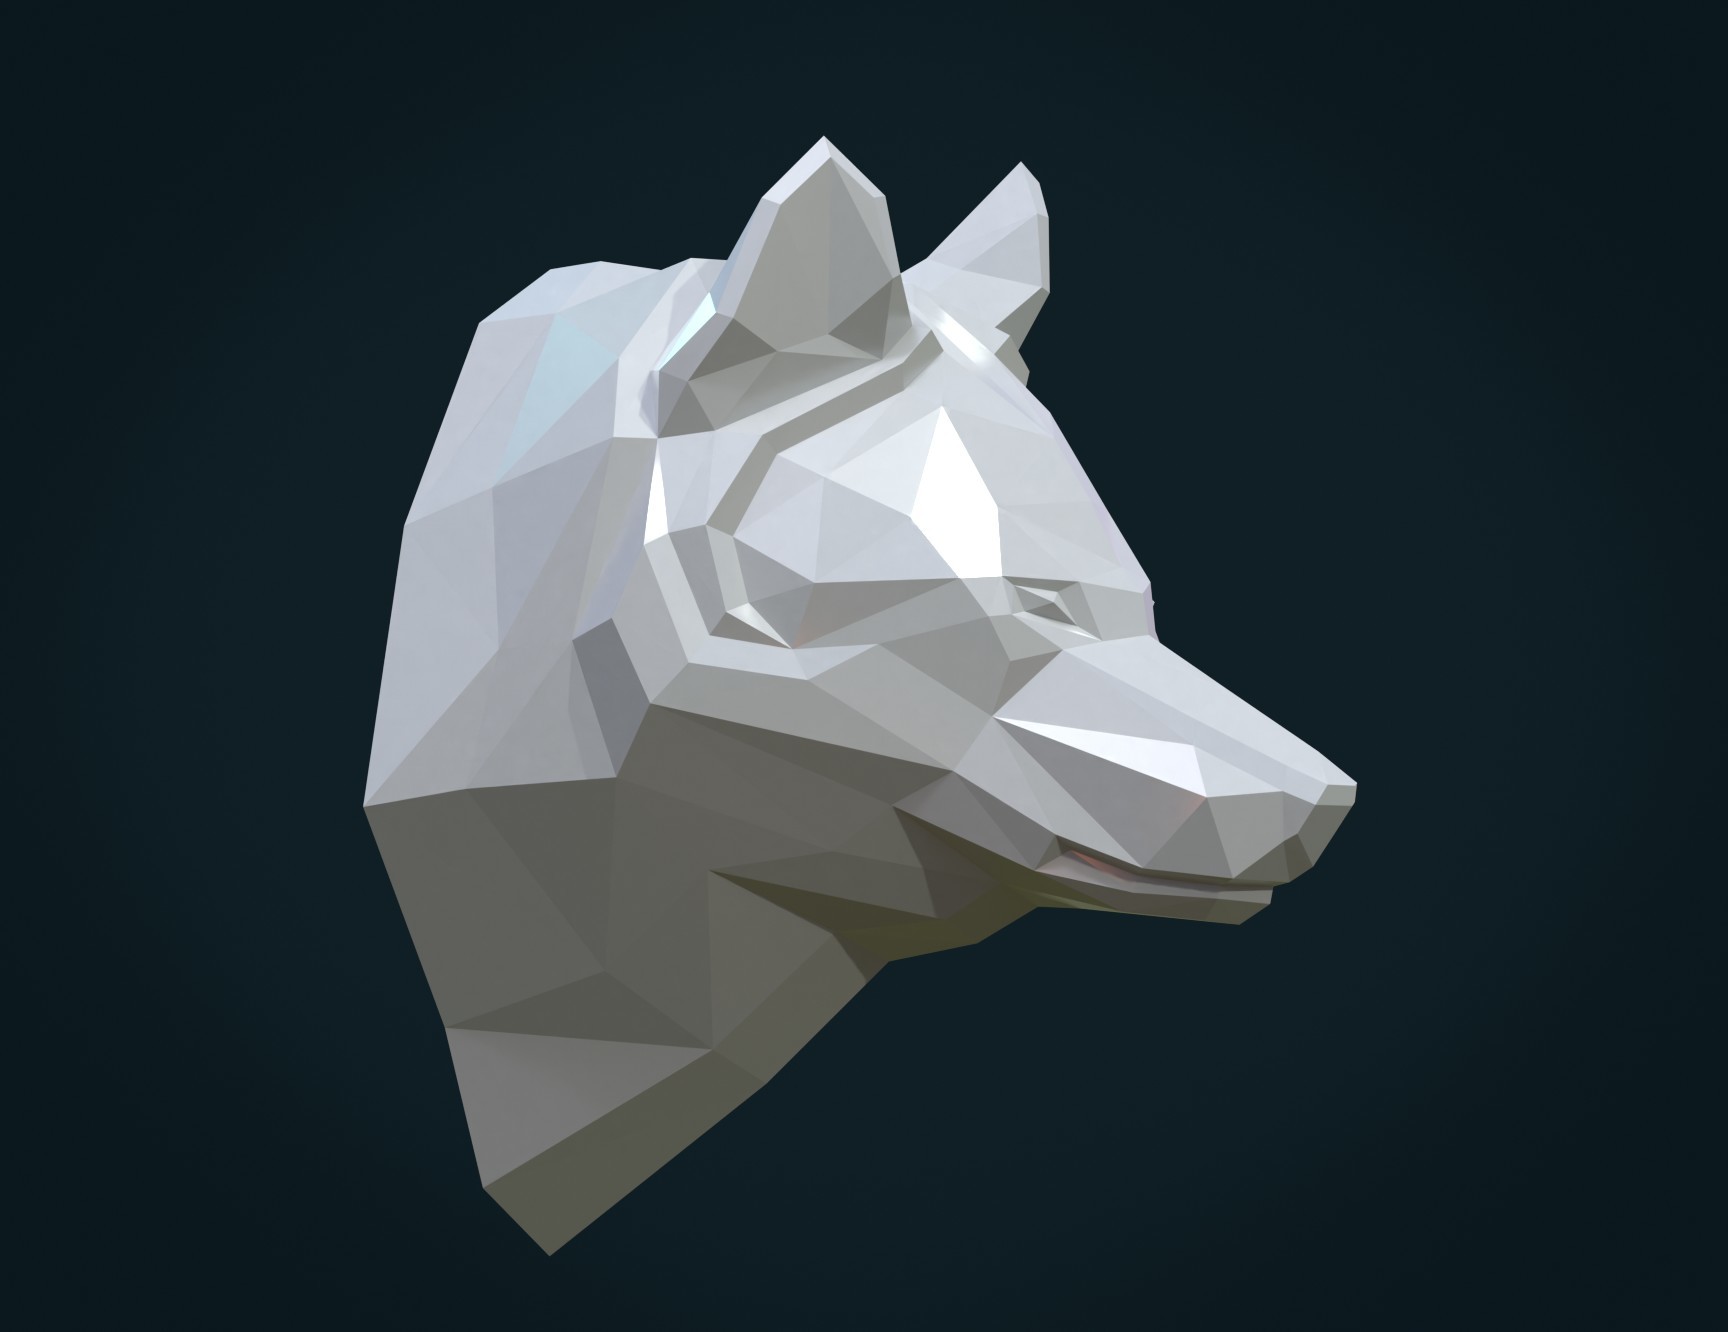 ArtStation - Low poly Wolf head | Resources